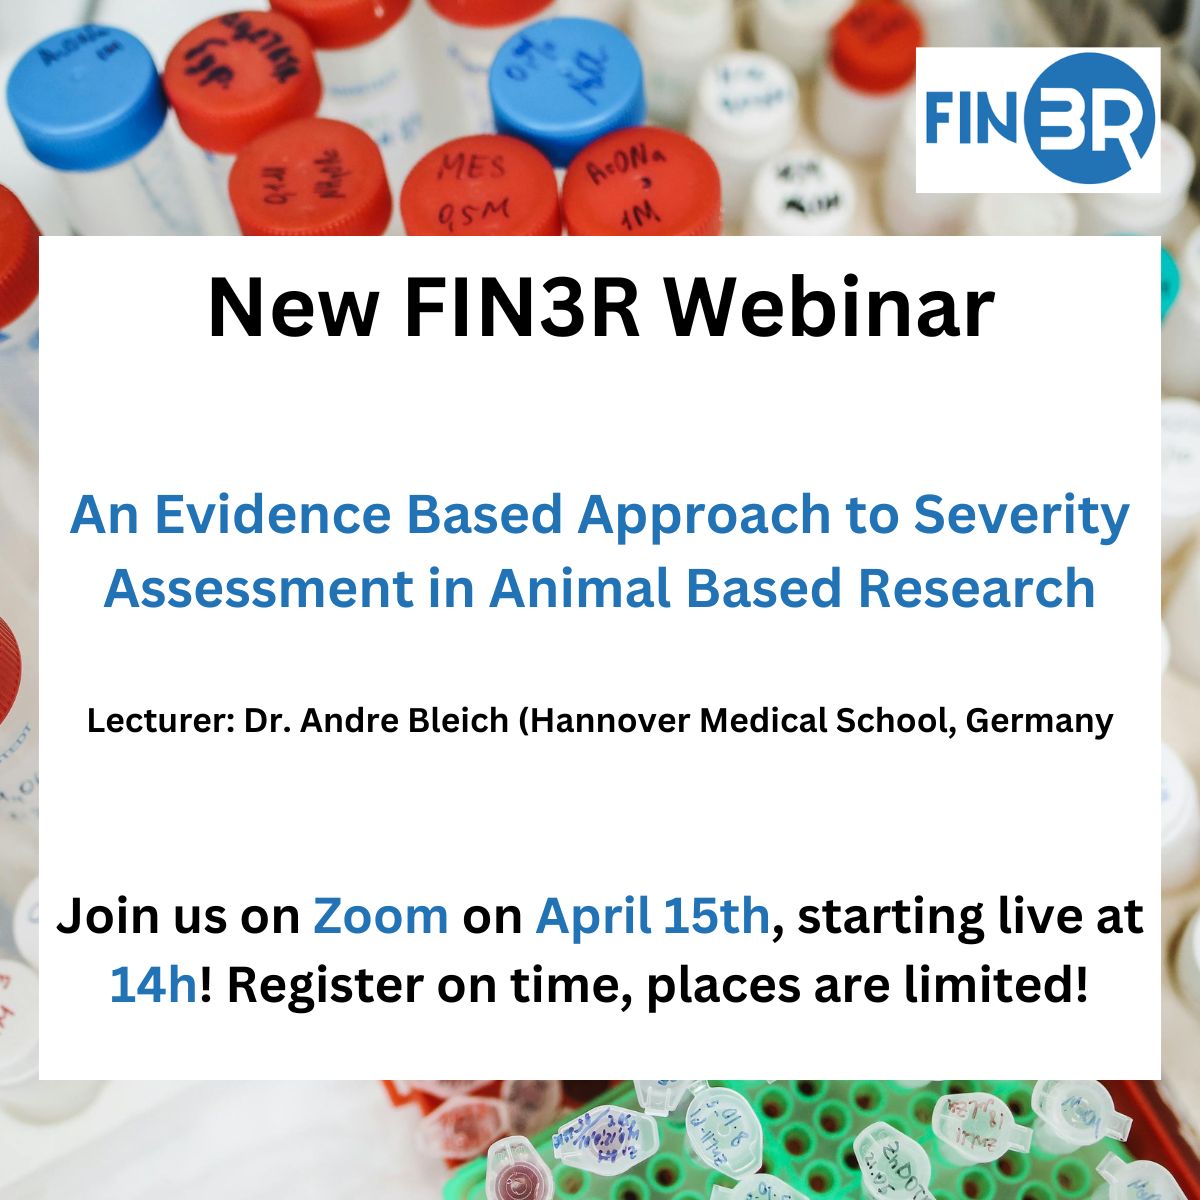 Make sure your afternoon of April 15th is free! #FIN3R is hosting a #webinar from 14-15 ⏰ This time we are discussing #severityassessment in #animalresearch with Dr. Andre Bleich from @MHH_life More information: fin3r.fi/en/news See you in Zoom! #3Rs #refinement